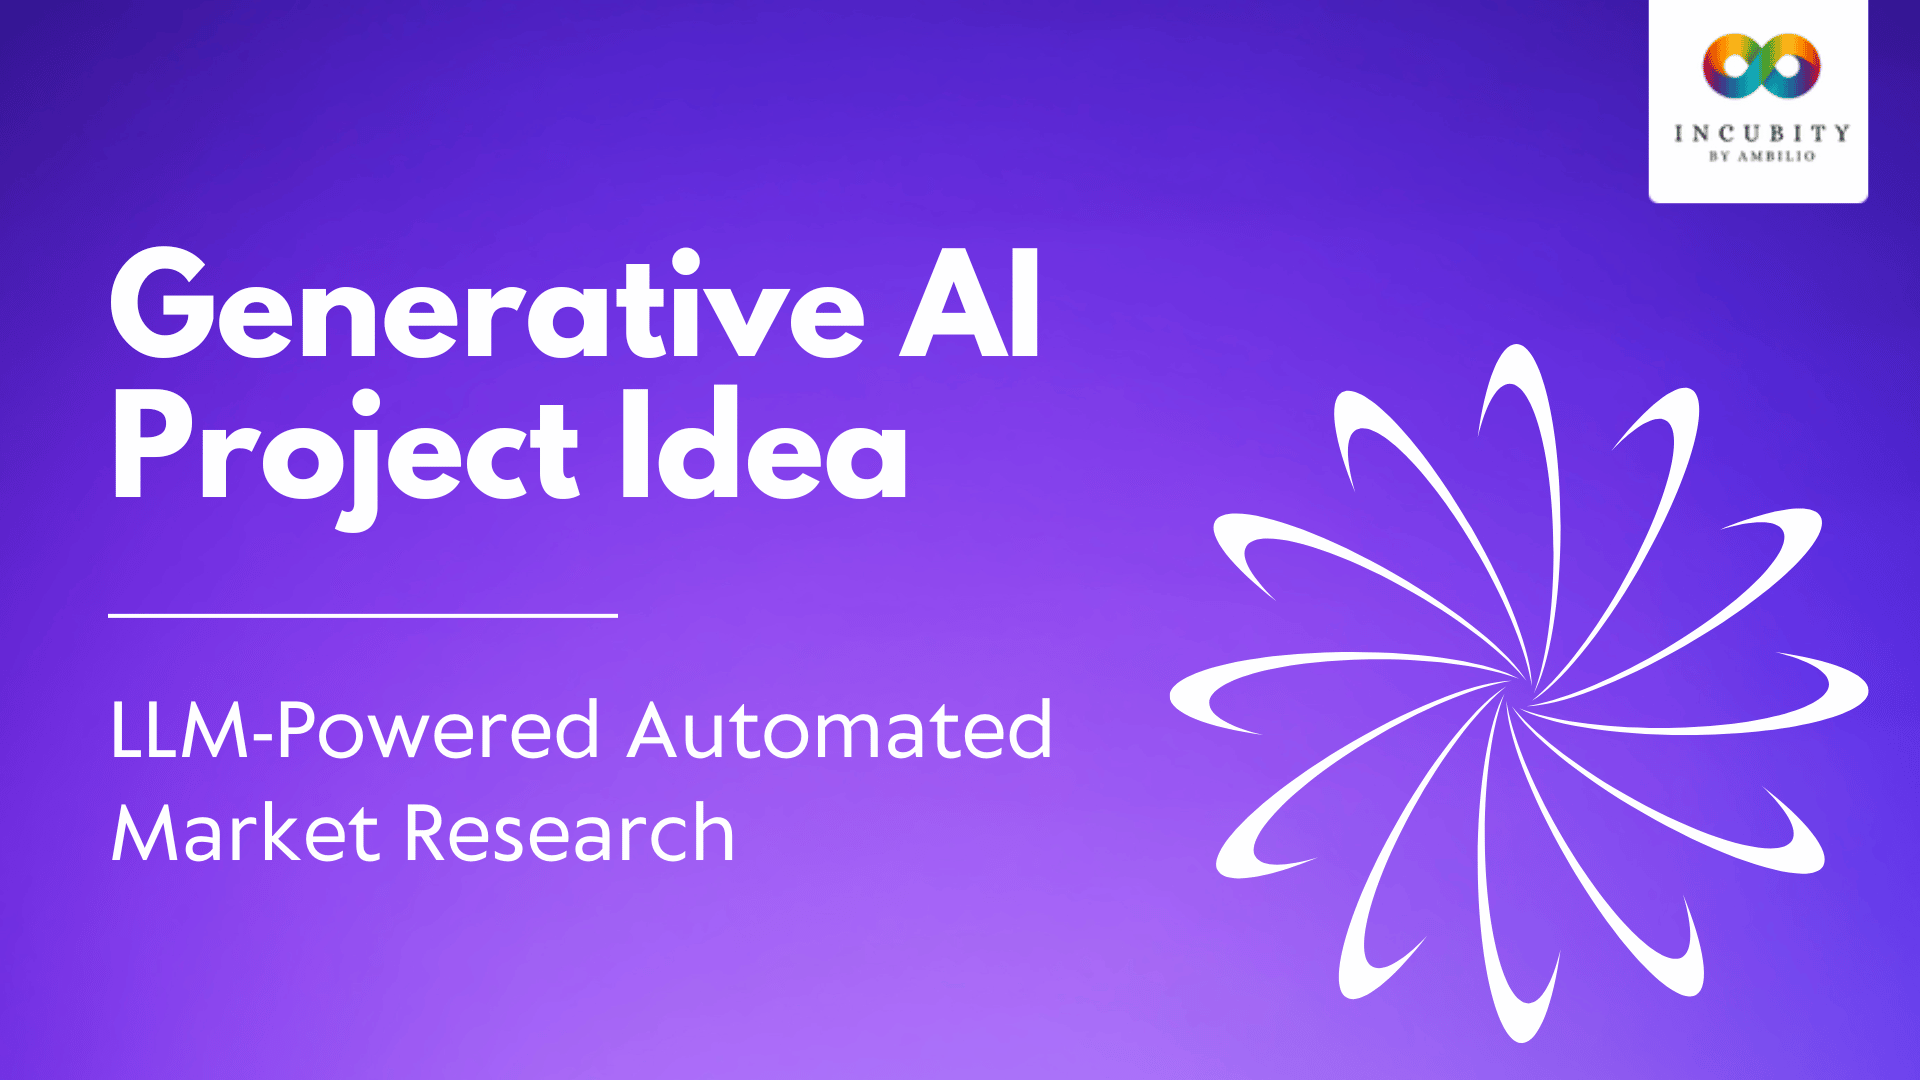 Generative AI Project Idea: LLM-Powered Automated Market Research